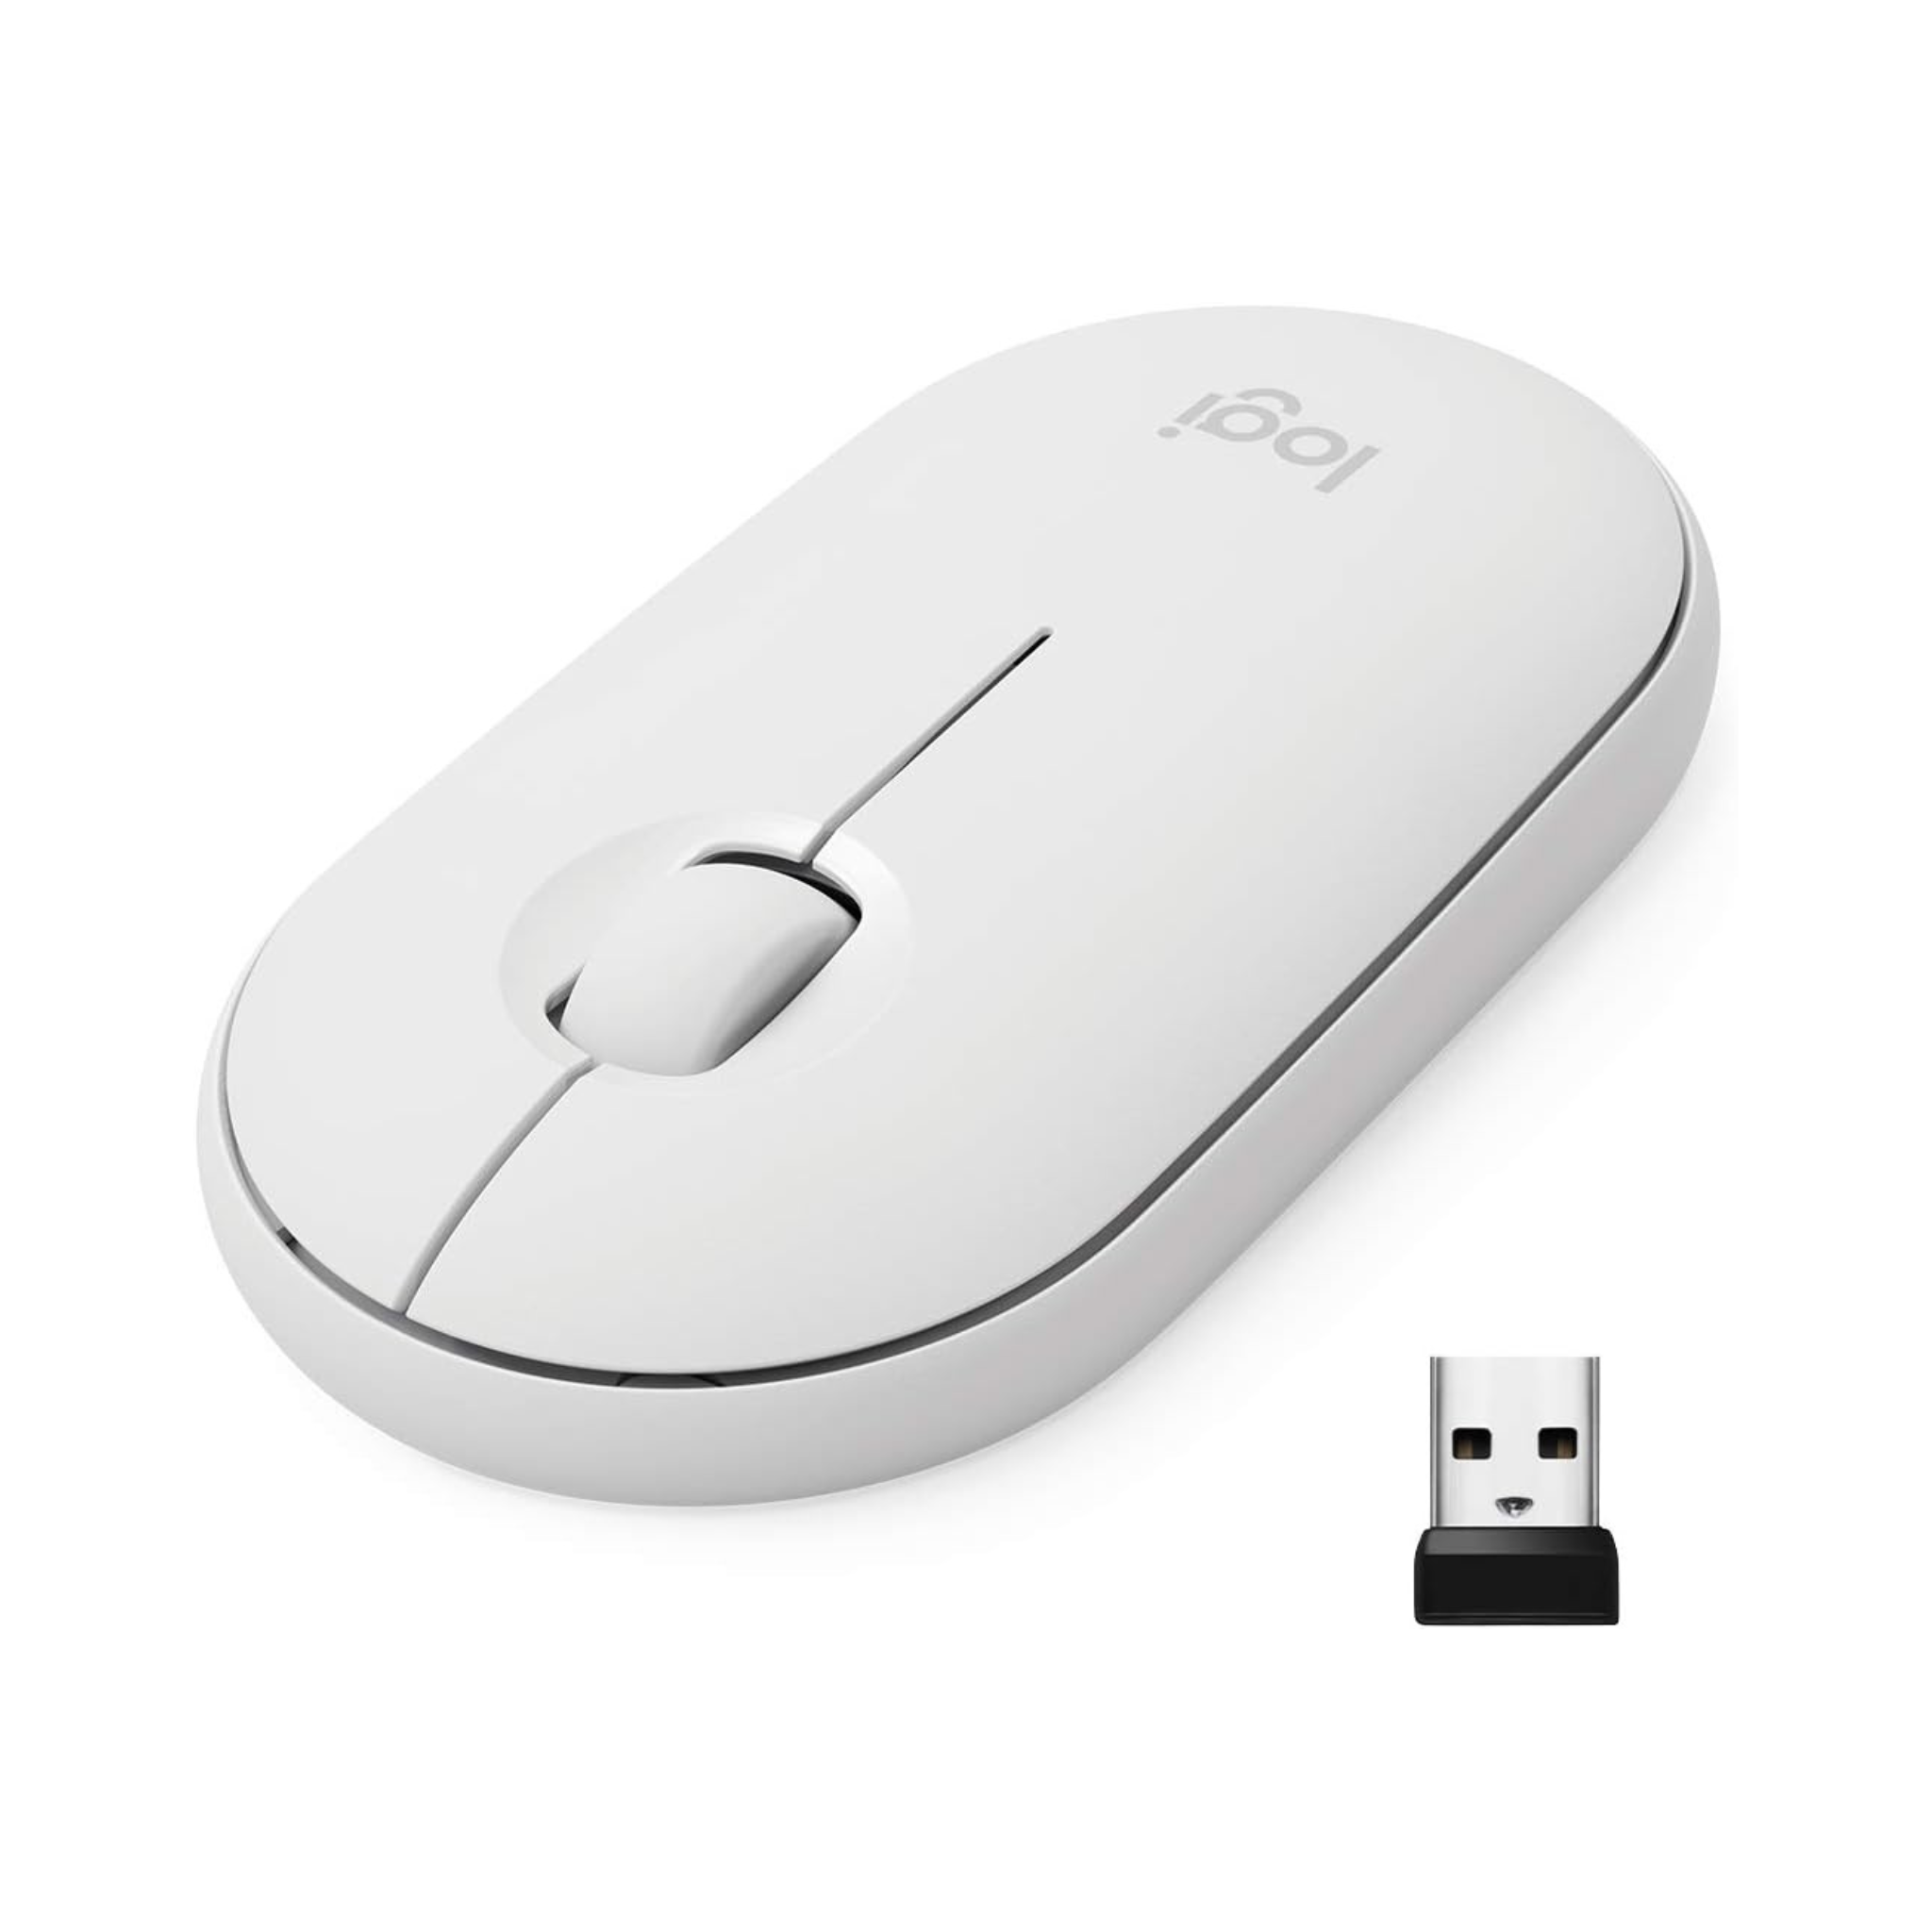 Logitech Pebble M350 Wireless Mouse with 2.4 GHz Receiver